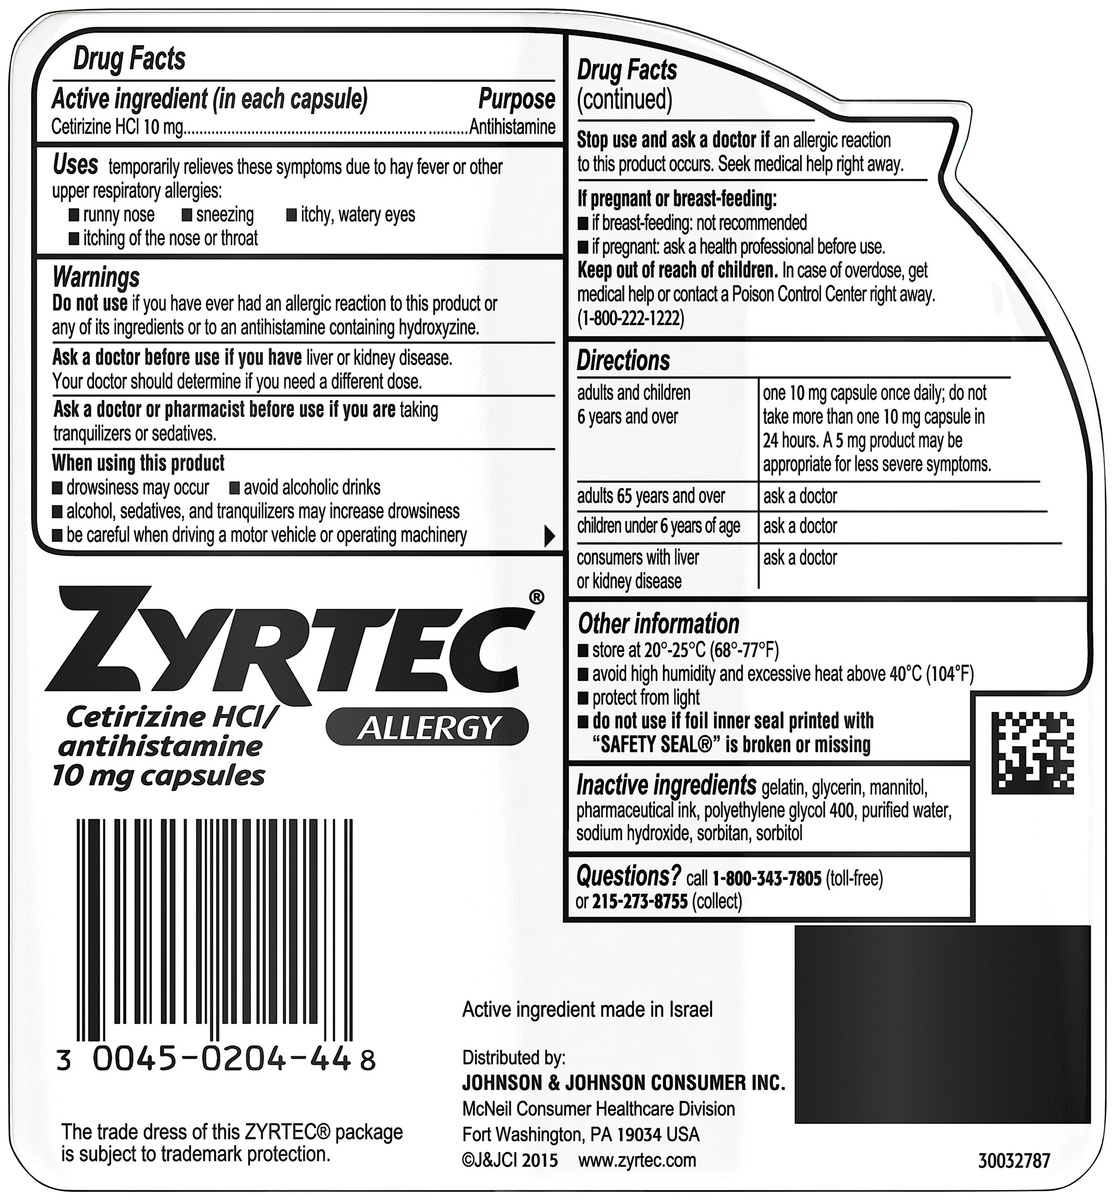 slide 6 of 7, Zyrtec 24 Hour Allergy Relief Liquid Gels, Antihistamine Capsules with Cetirizine Hydrochloride Allergy Medicine for All-Day Relief from Runny Nose, Sneezing, Itchy Eyes & More, 40 ct